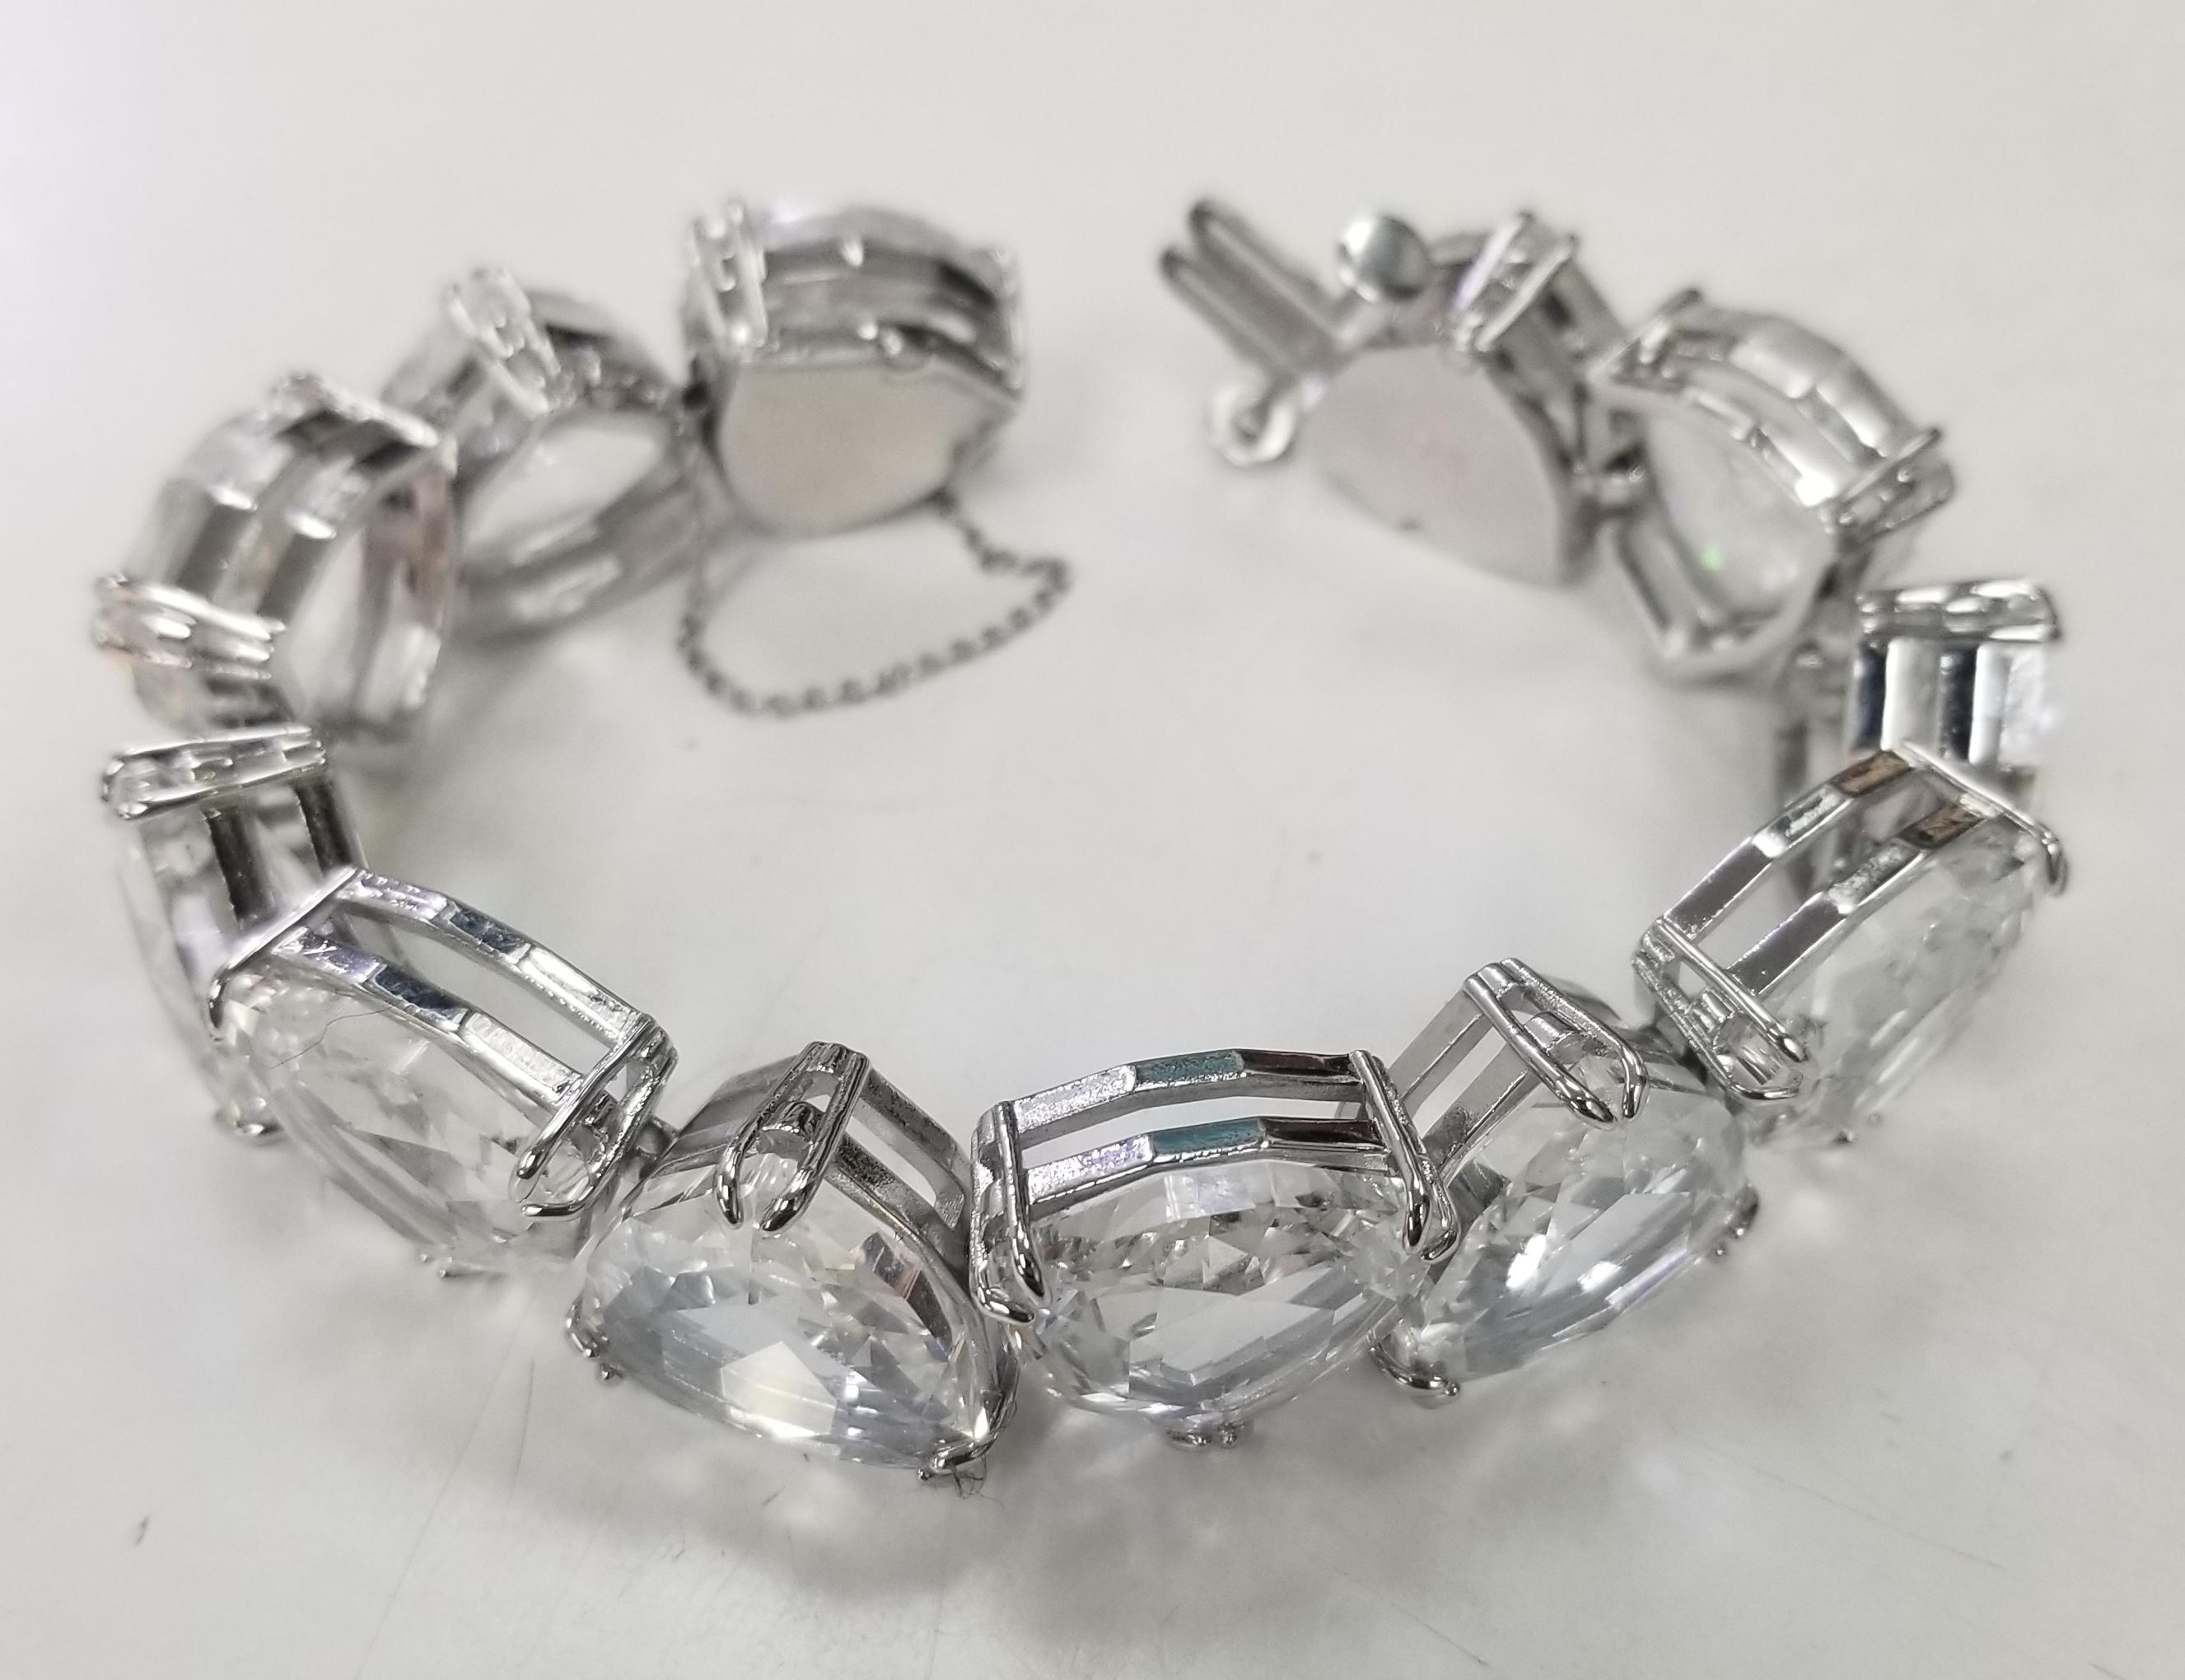 Collection:  Millenia
Colour:  White
Minimum length: 18 cm
Maximum length: 21 cm
Material:  Crystals, Rhodium plated
Expertly crafted from a row of trillion cut crystals, this unique bracelet will become your new wardrobe staple. Finished with a